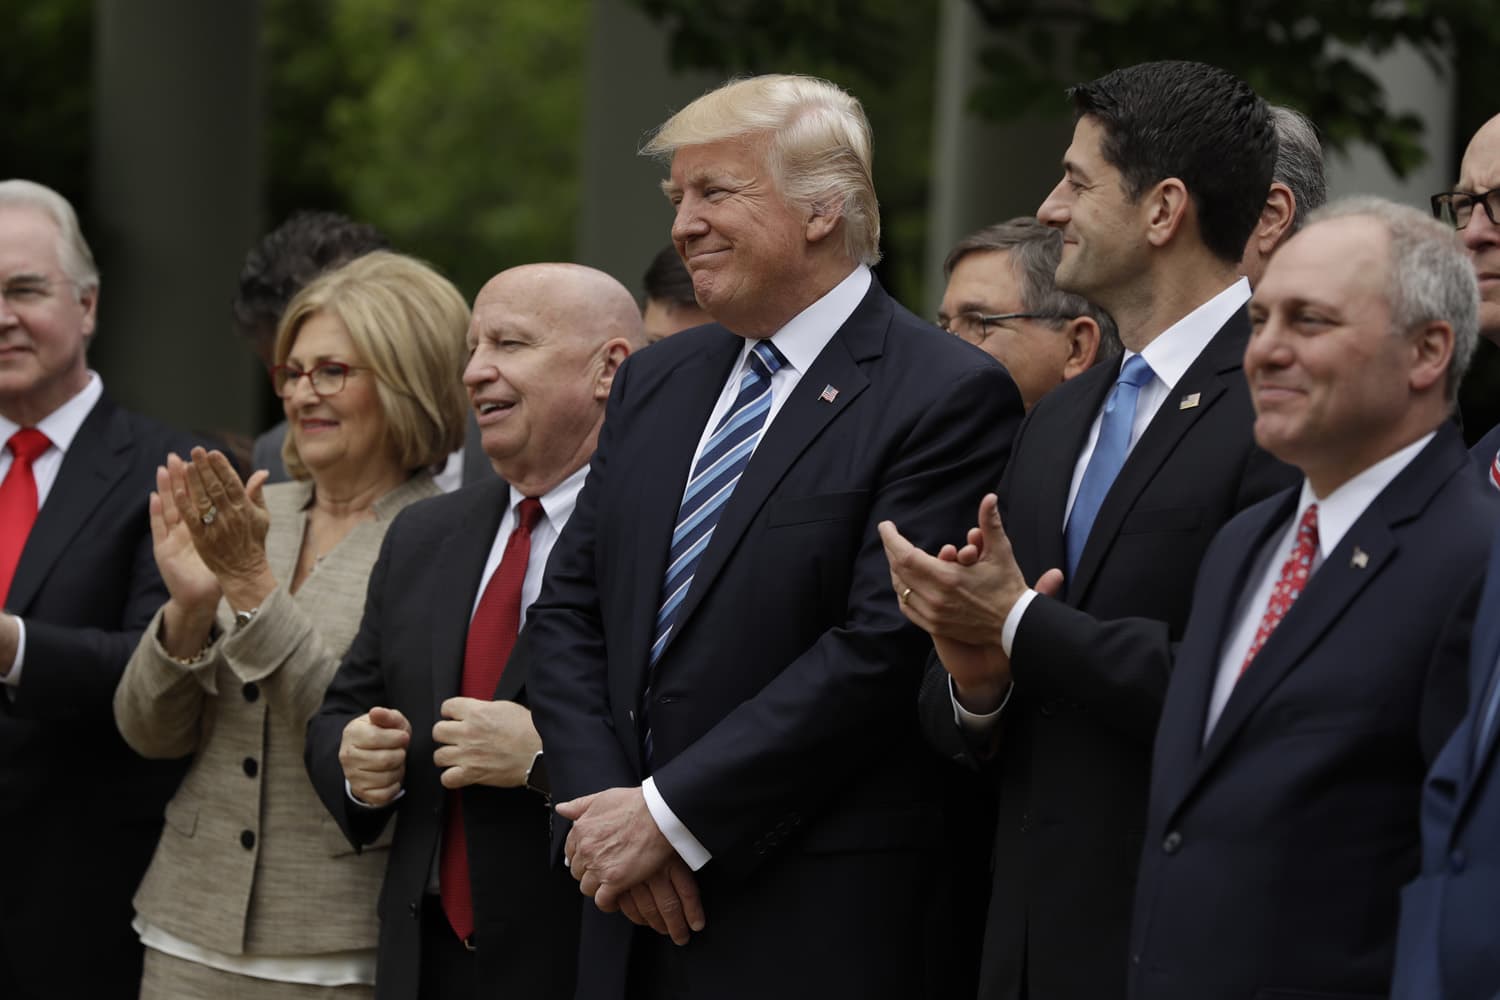 President Donald Trump, flanked by House Ways and Means Committee Chairman Rep. Kevin Brady, R-Texas, and House Speaker Paul Ryan of Wis., are seen in the Rose Garden of the White House in Washington. (Evan Vucci/AP)